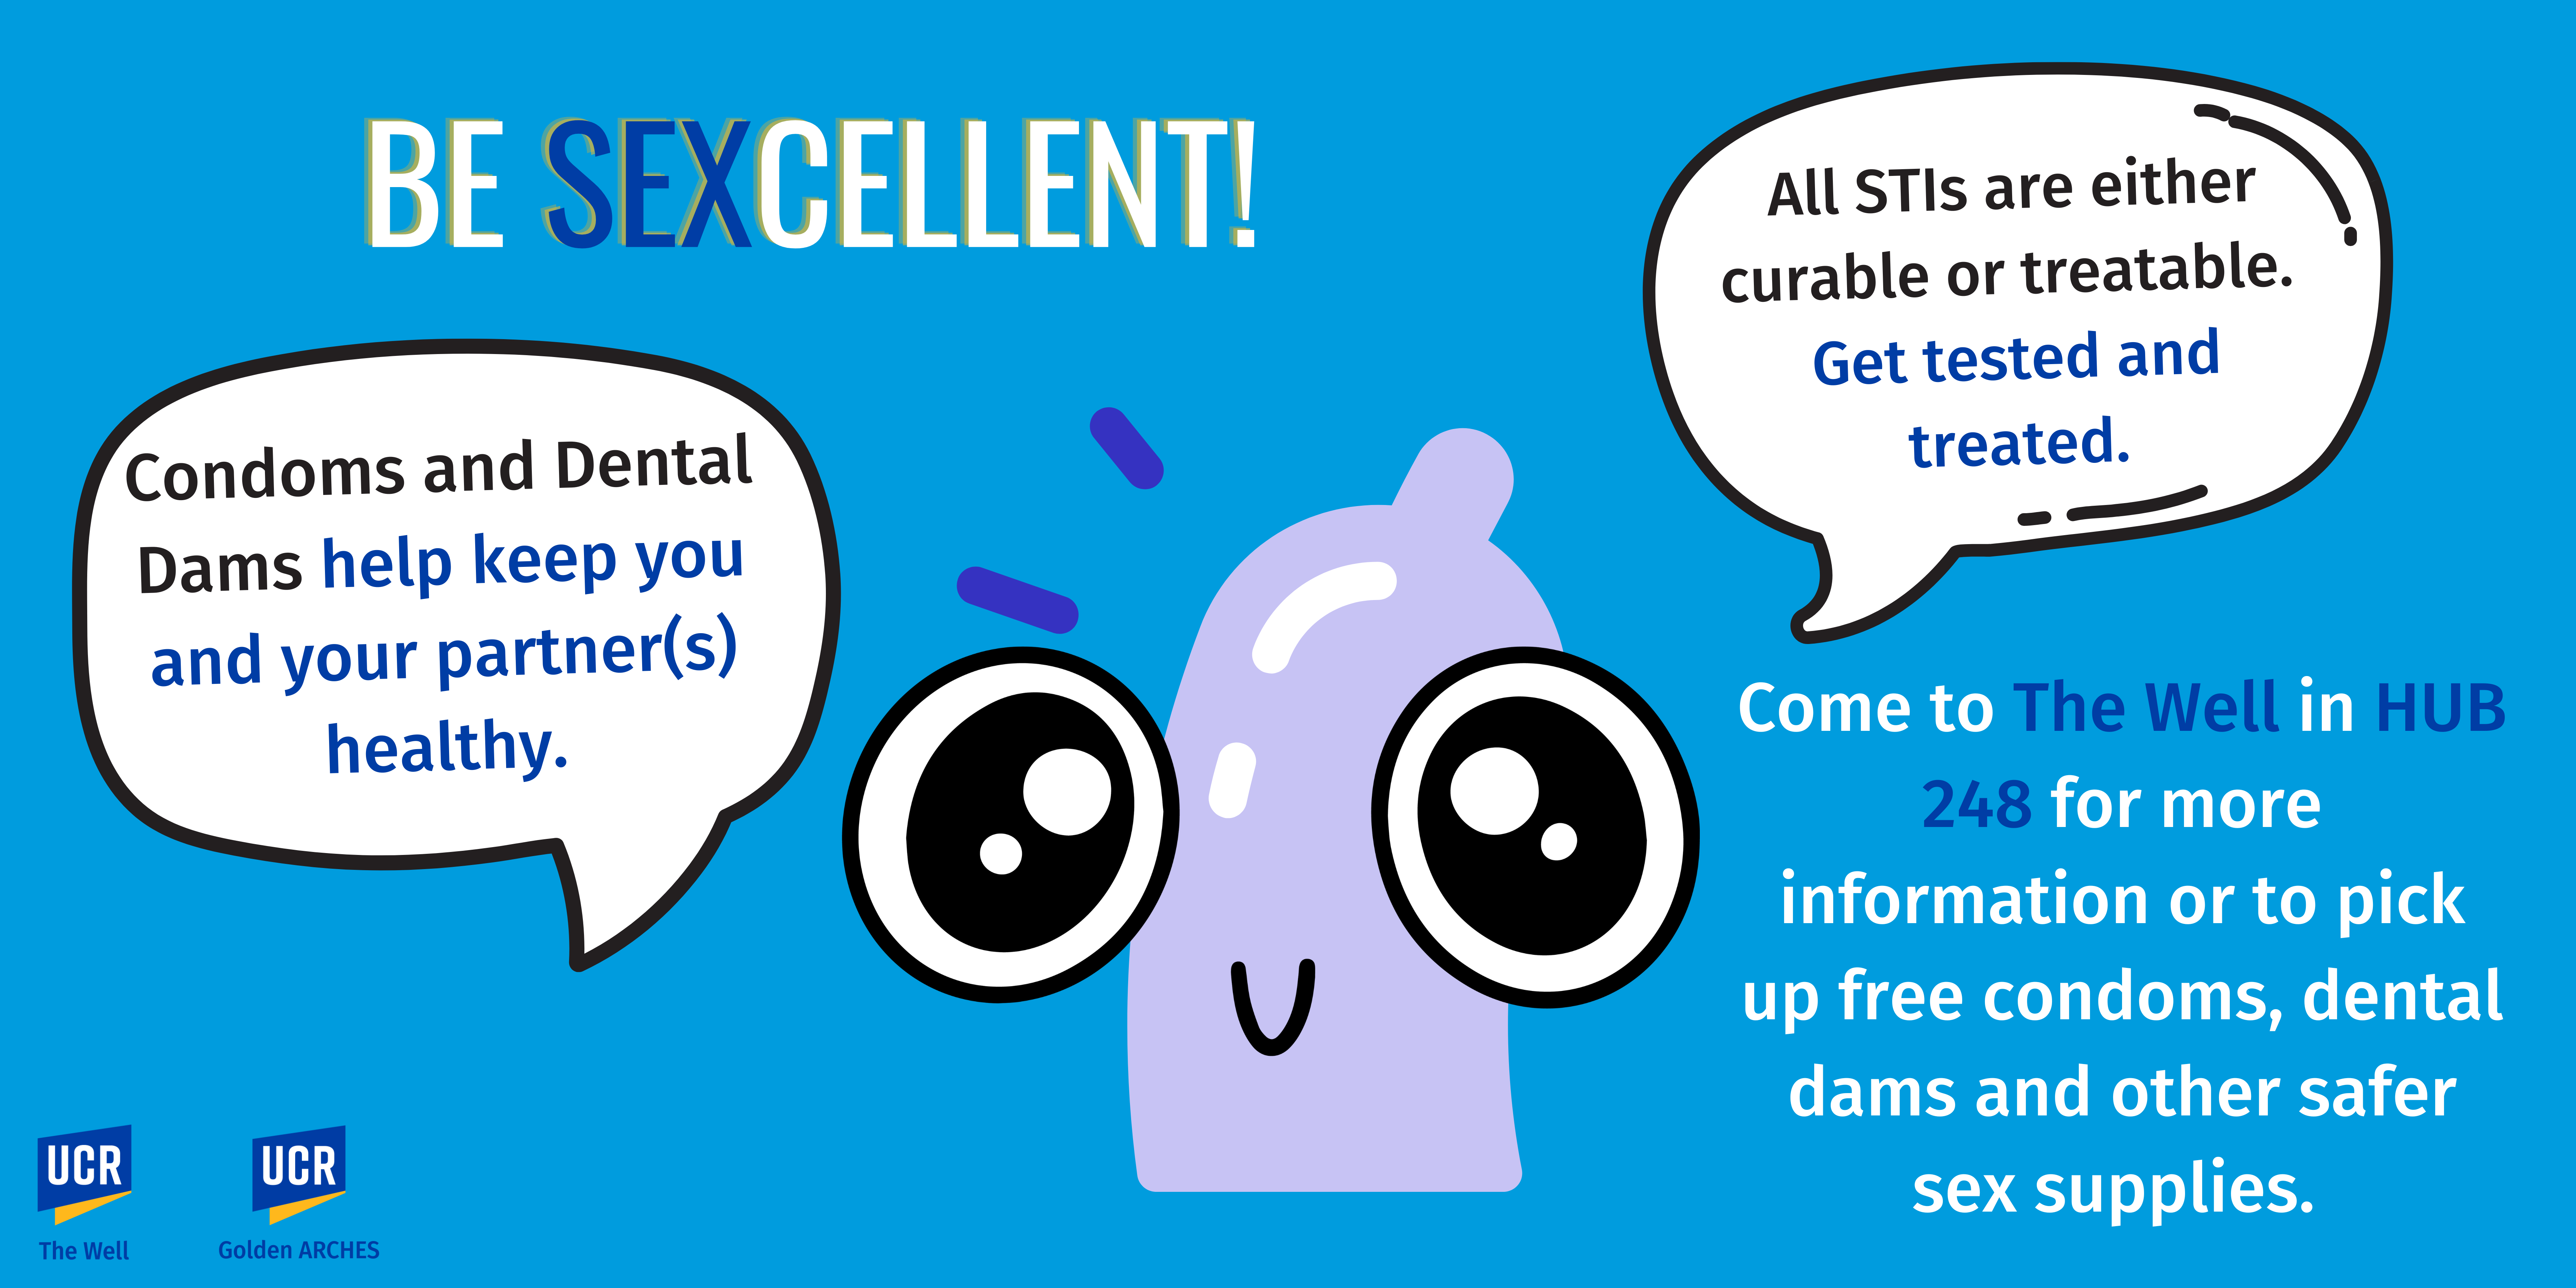 Be Sexcellent! Condoms and dental dams help keep you and your partner(s) healthy. All STI's are either curable or treatable. Get tests and treated. Come to The Well in HUB 248 for more information or to pick up free condoms, dental dams and other safer sex supplies. 